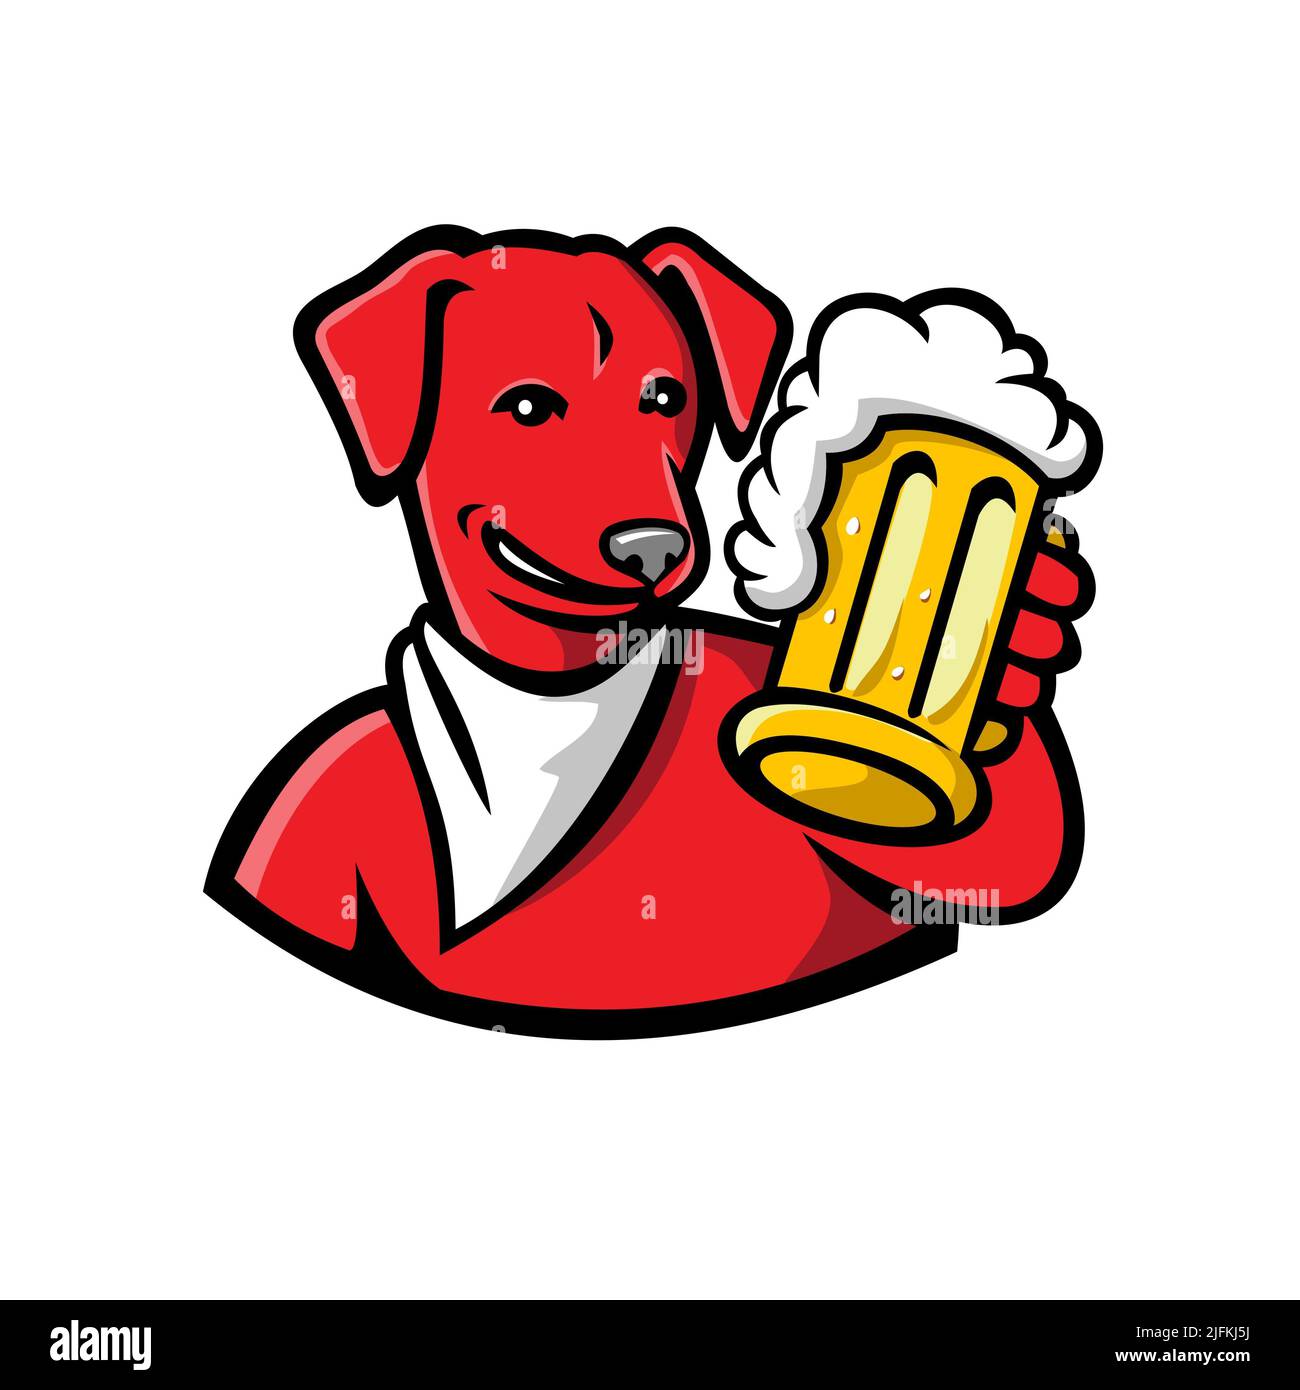 Sports mascot icon illustration of head of a red English Lab or Labrador dog holding a beer mug toasting viewed from front on isolated background in Stock Photo